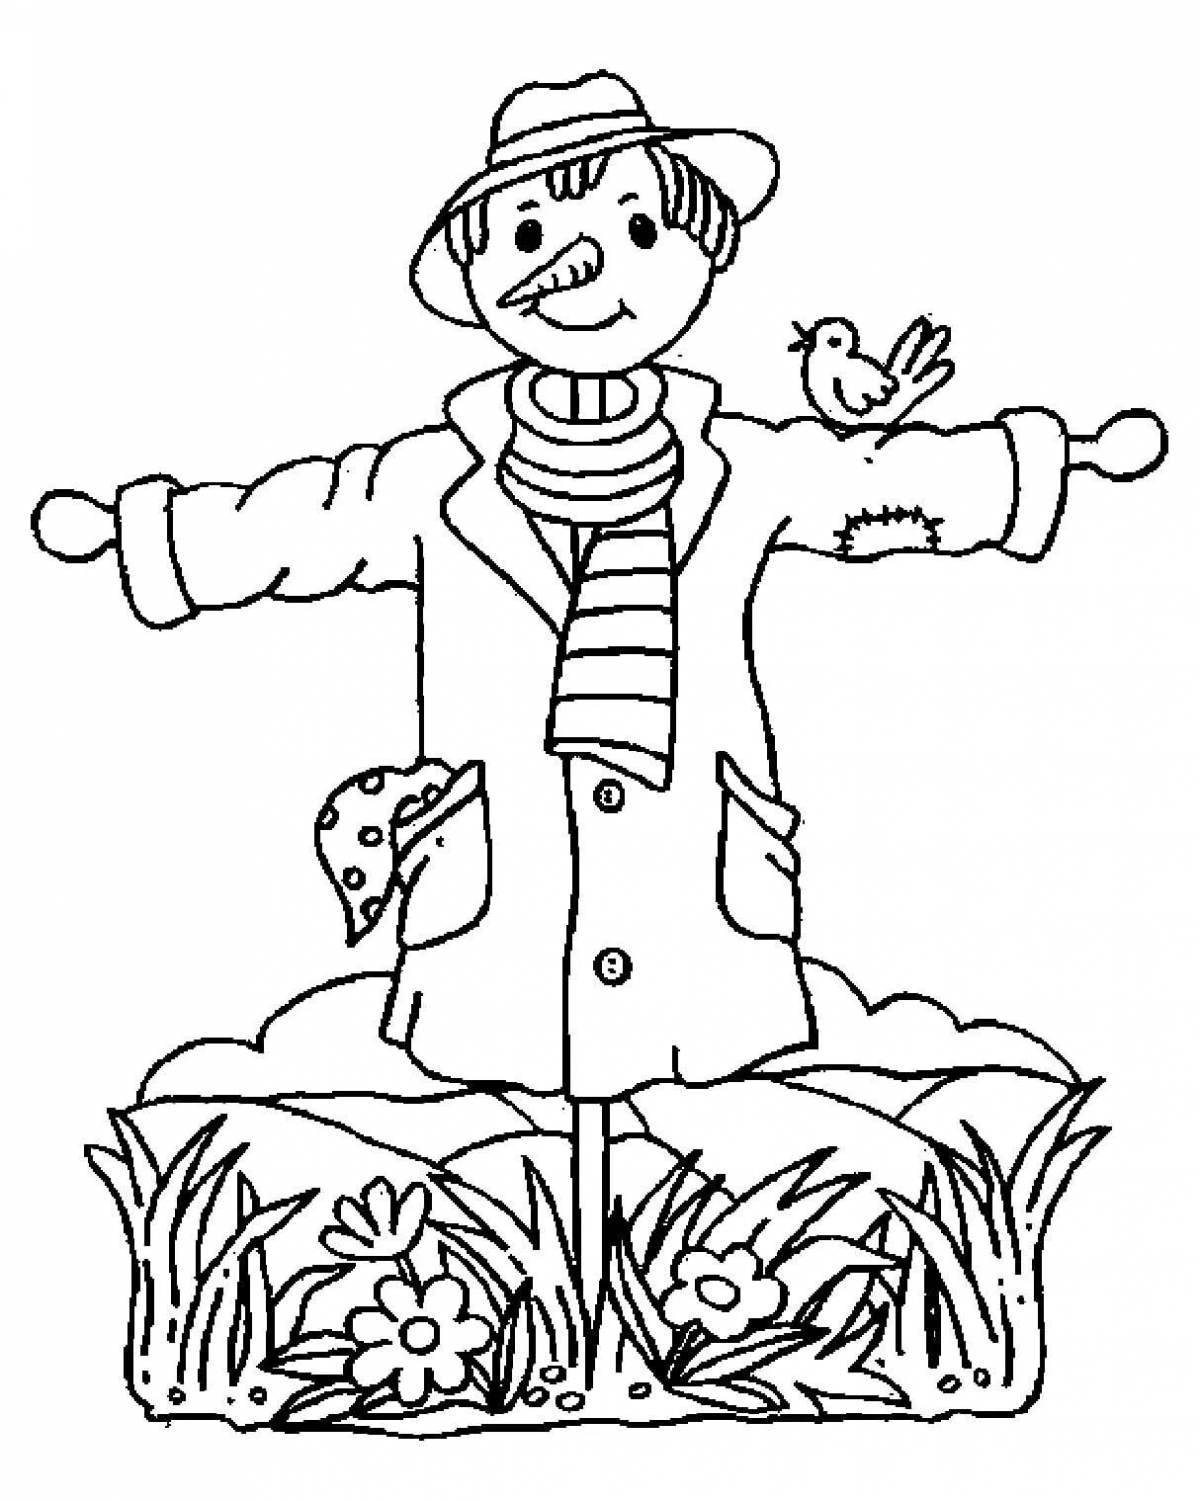 Playful stuffed animal coloring page for kids